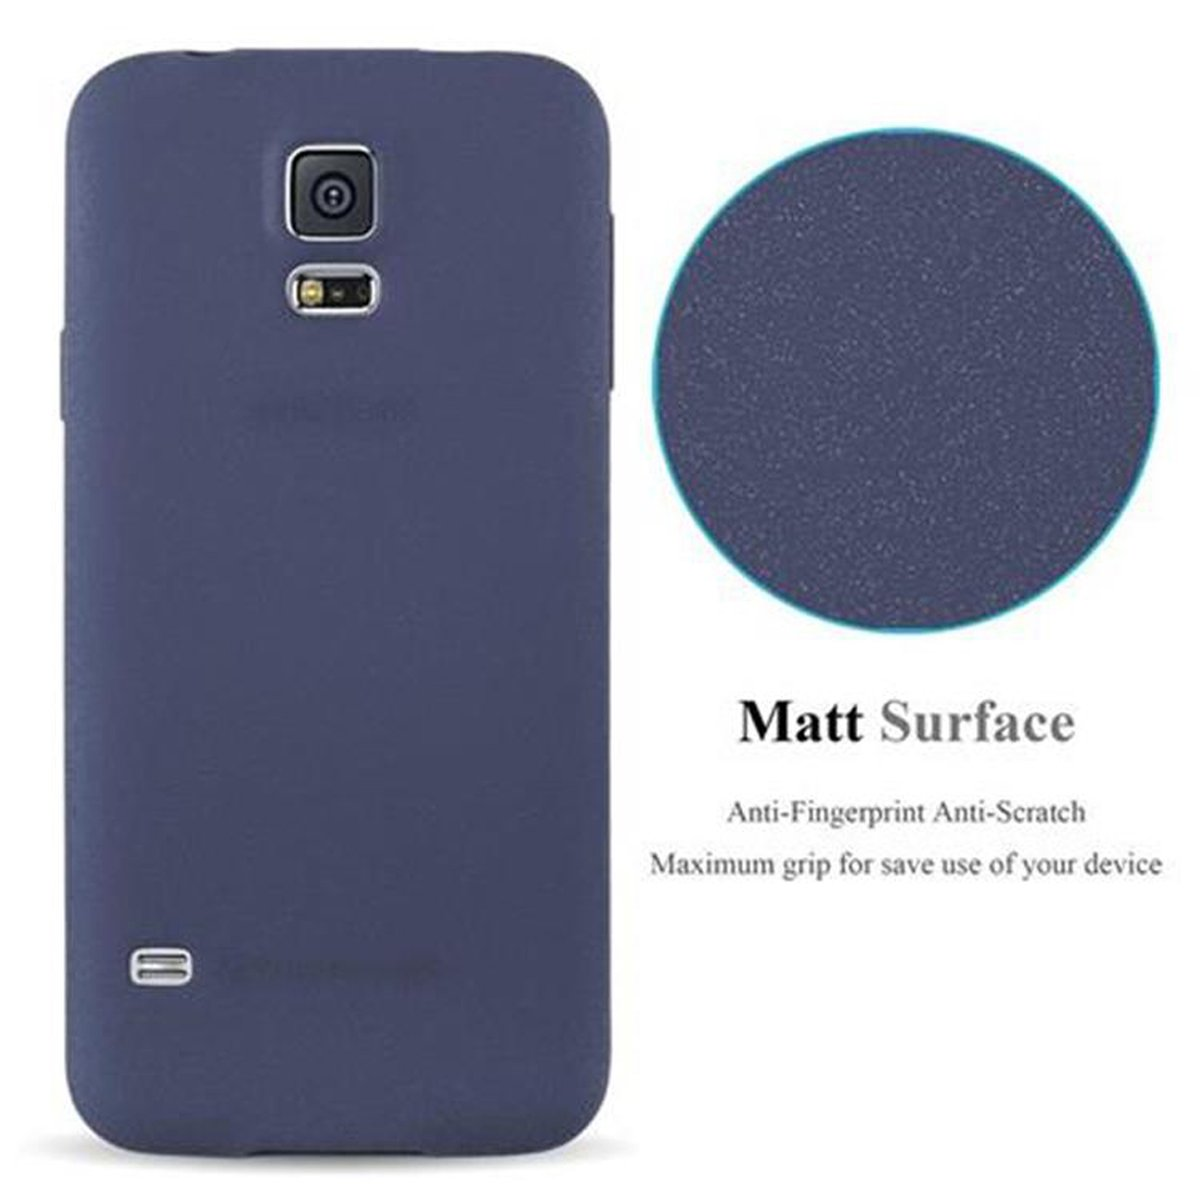 NEO, DUNKEL Samsung, BLAU Frosted CADORABO Galaxy Backcover, FROST S5 TPU S5 Schutzhülle, /